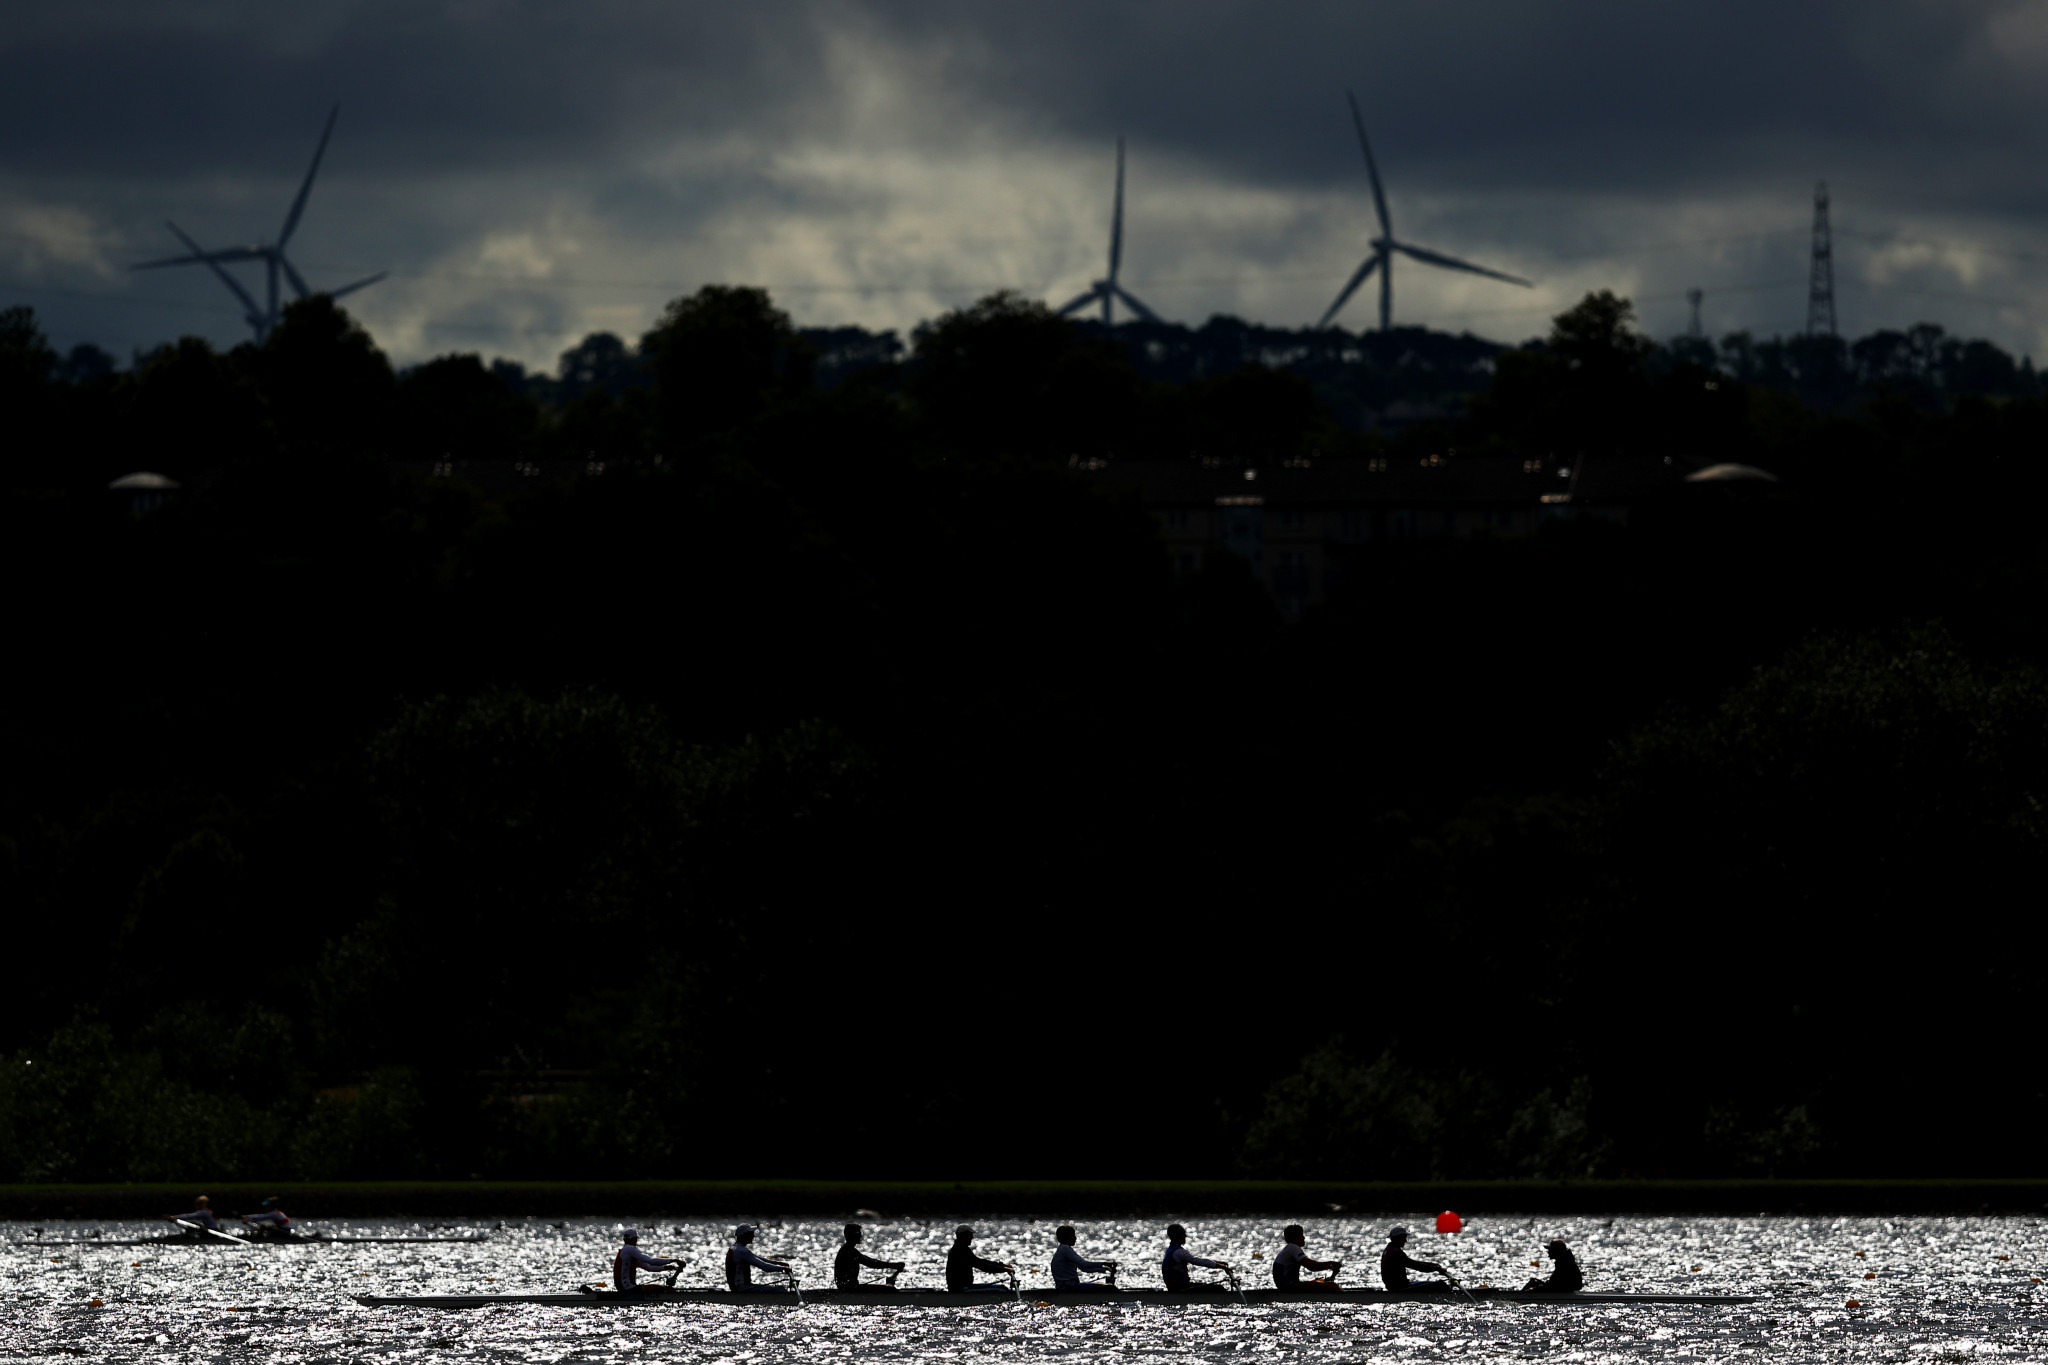 In Belgrade, Russia and Belarus will be allowed only in the single sculls or pairs, with Para and lightweight rowers in singles only ©Getty Images